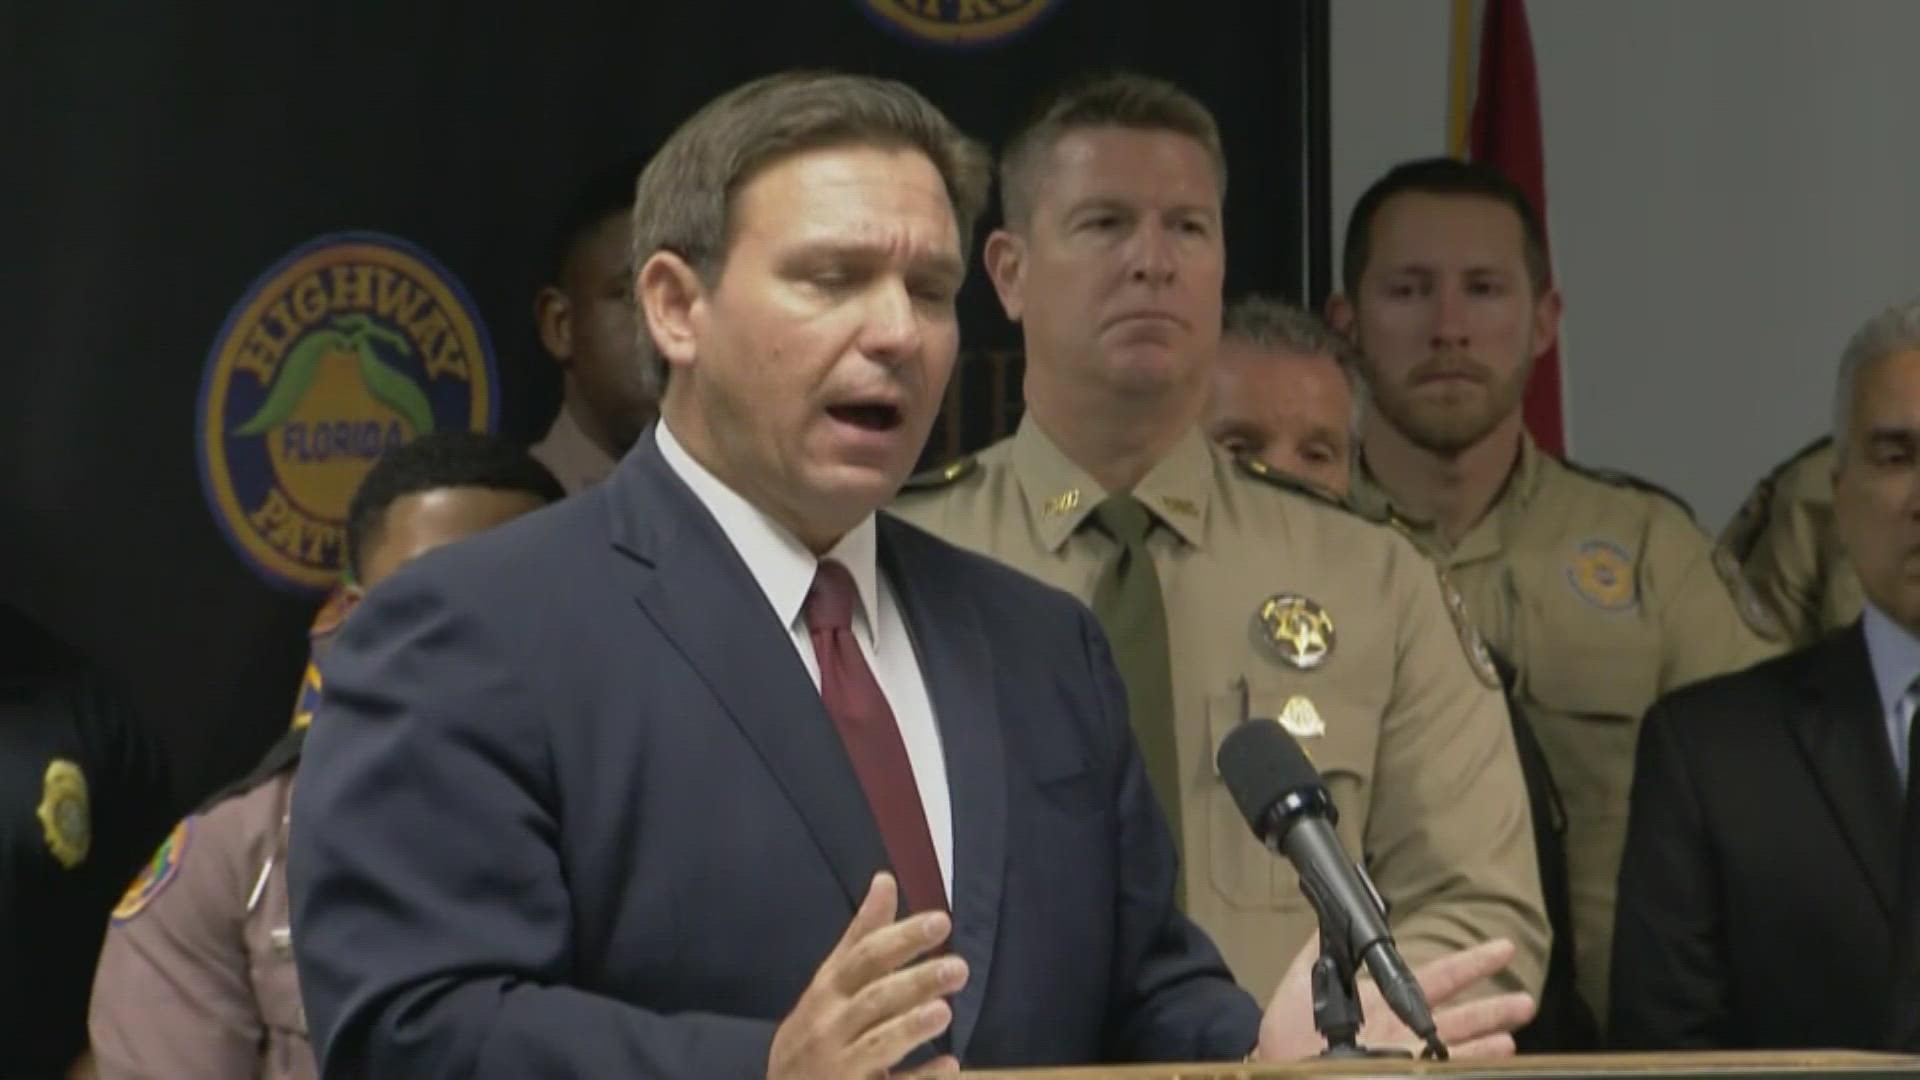 DeSantis says Florida has one of the lowest rates of COVID-19 in the country.